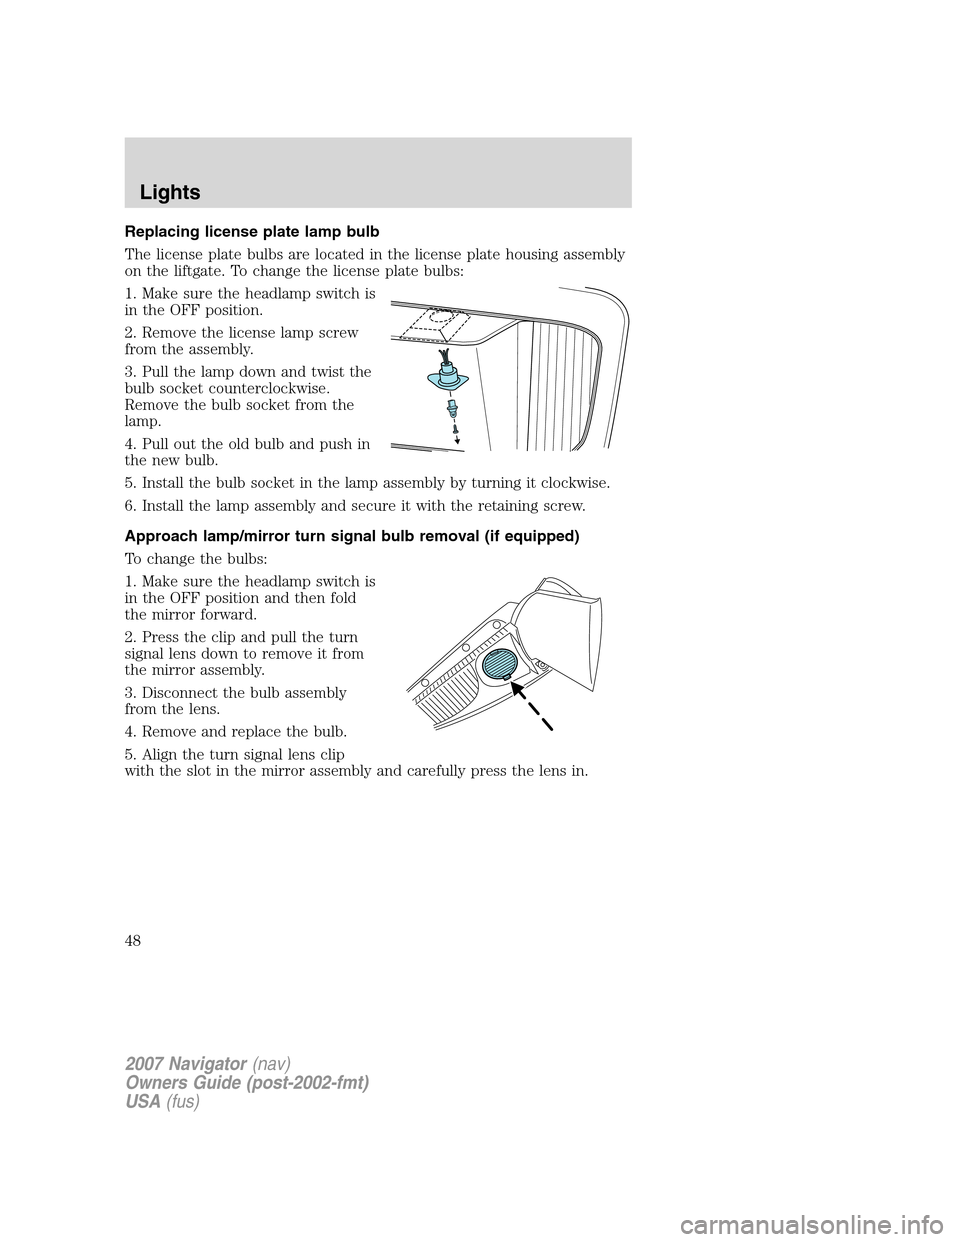 LINCOLN NAVIGATOR 2007  Owners Manual Replacing license plate lamp bulb
The license plate bulbs are located in the license plate housing assembly
on the liftgate. To change the license plate bulbs:
1. Make sure the headlamp switch is
in t